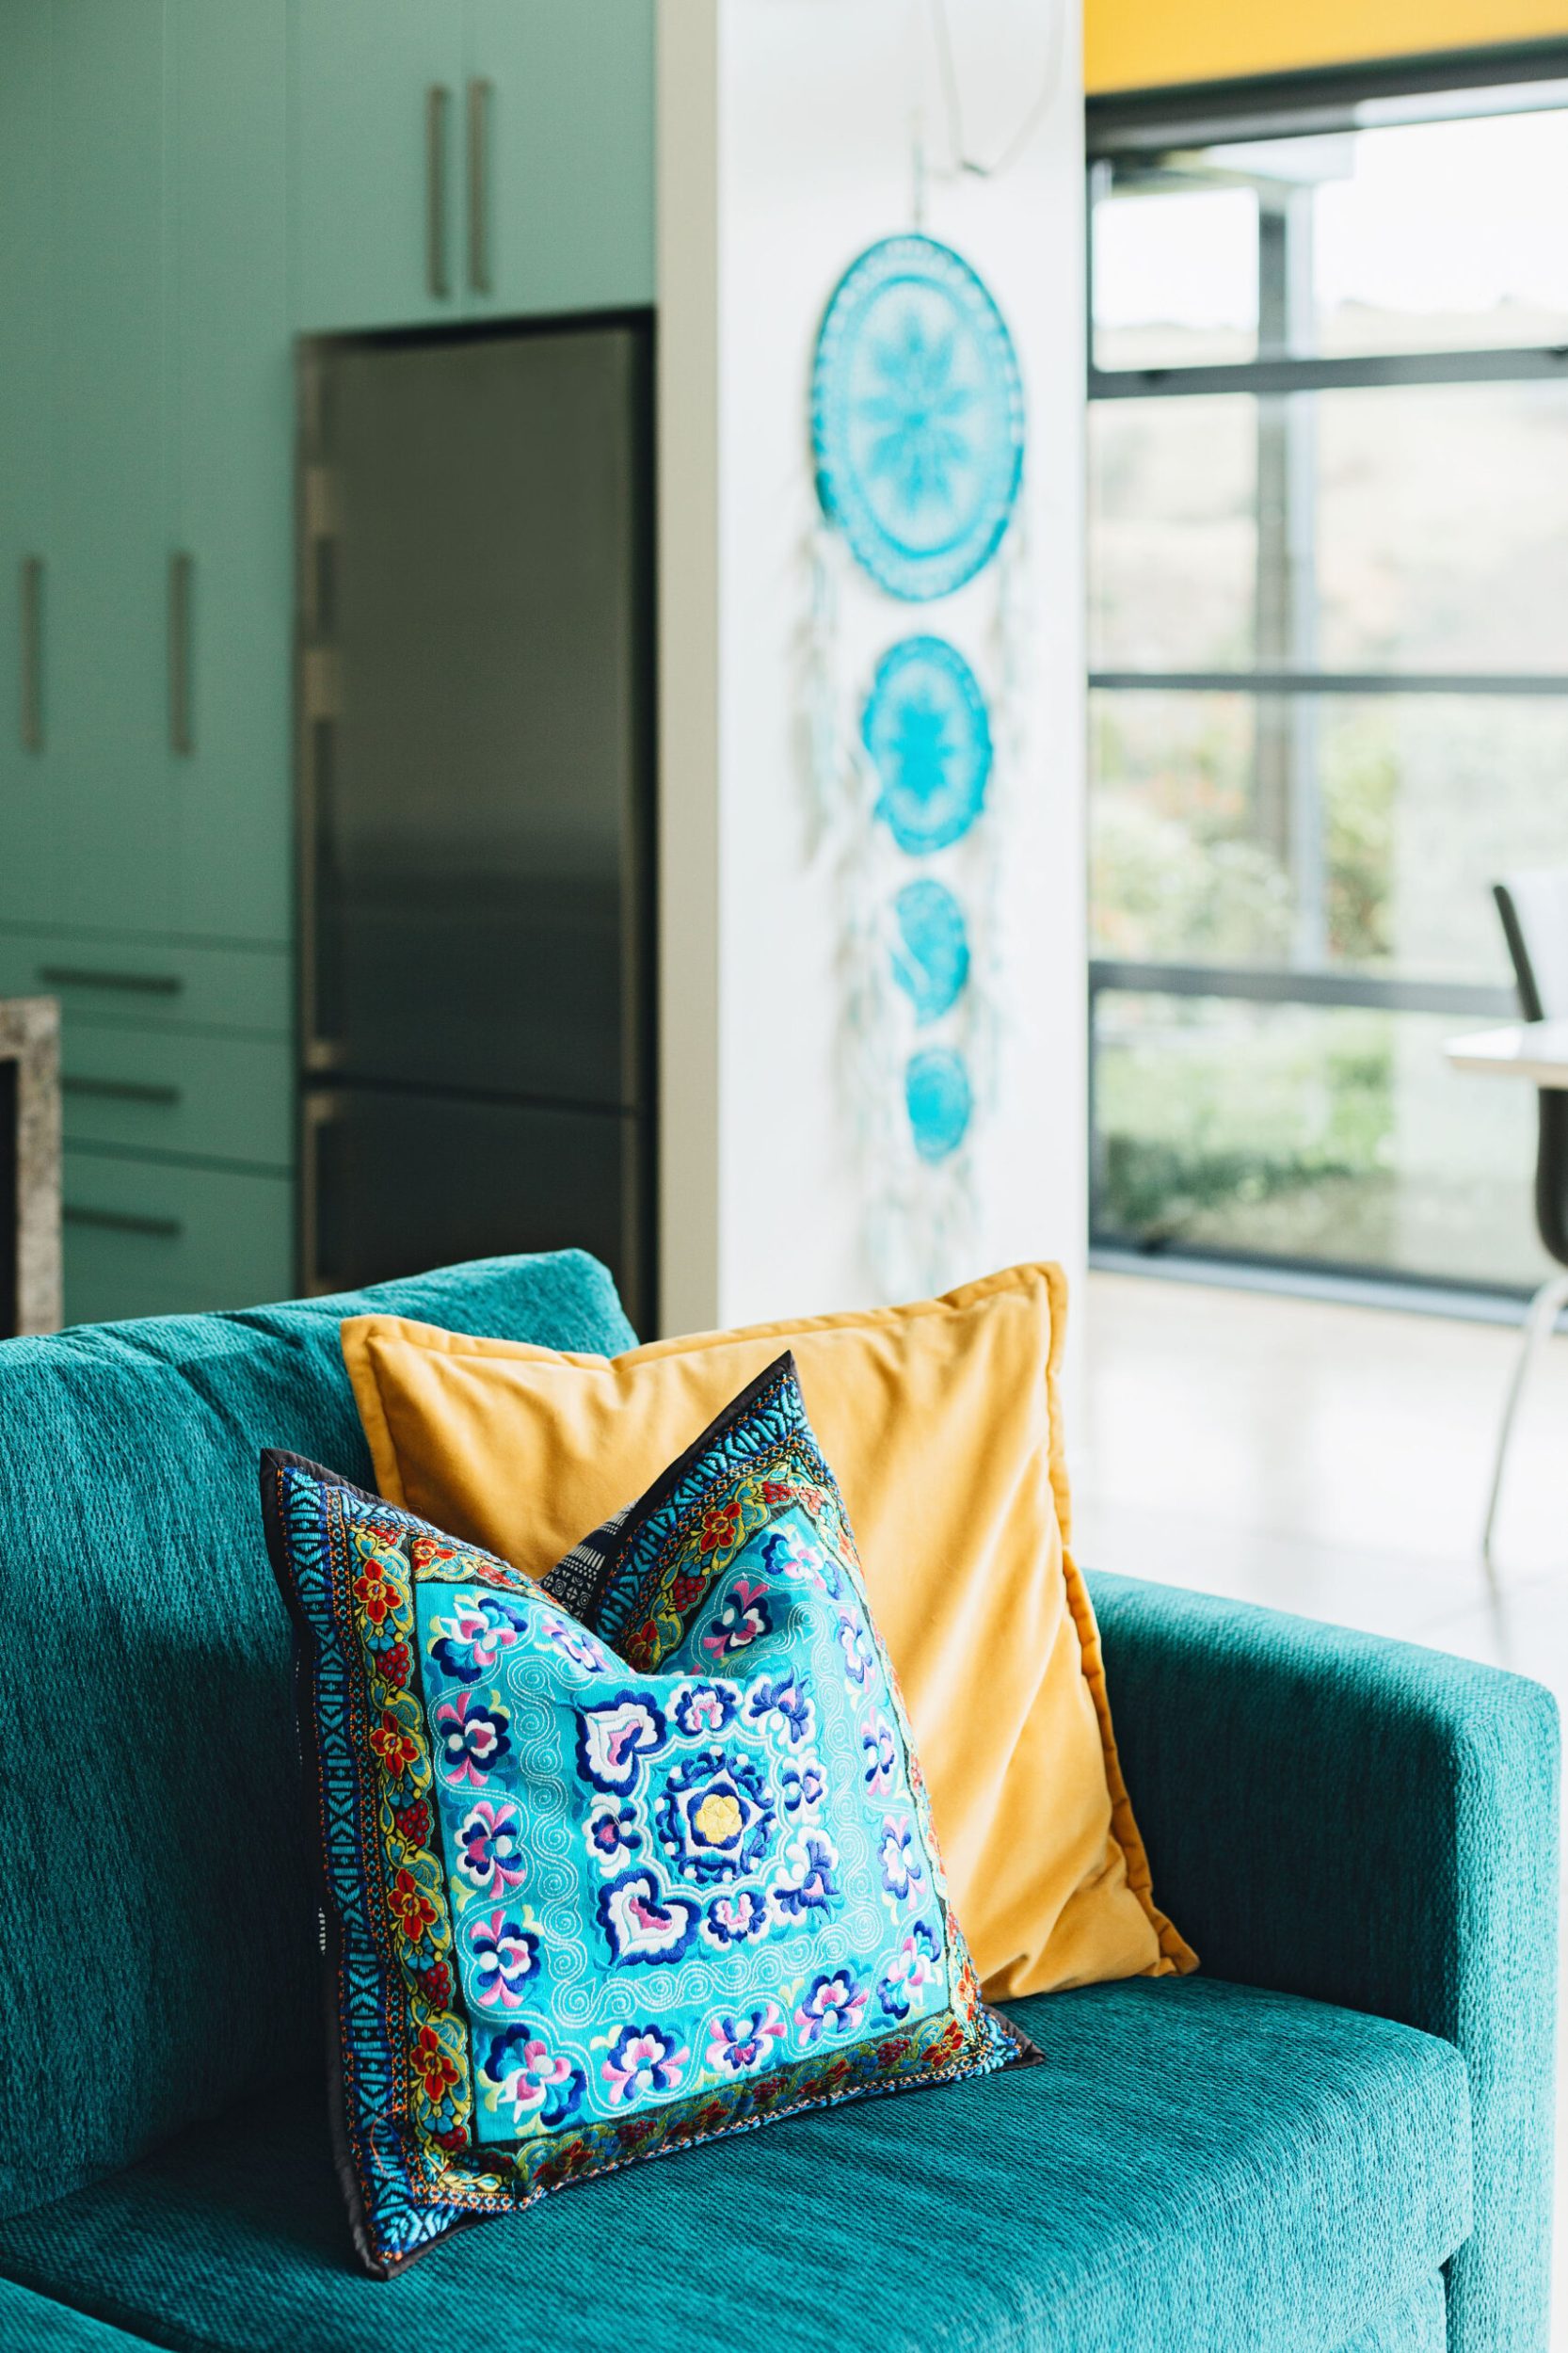 An emerald green velvet couch with blue and yellow boho cushions